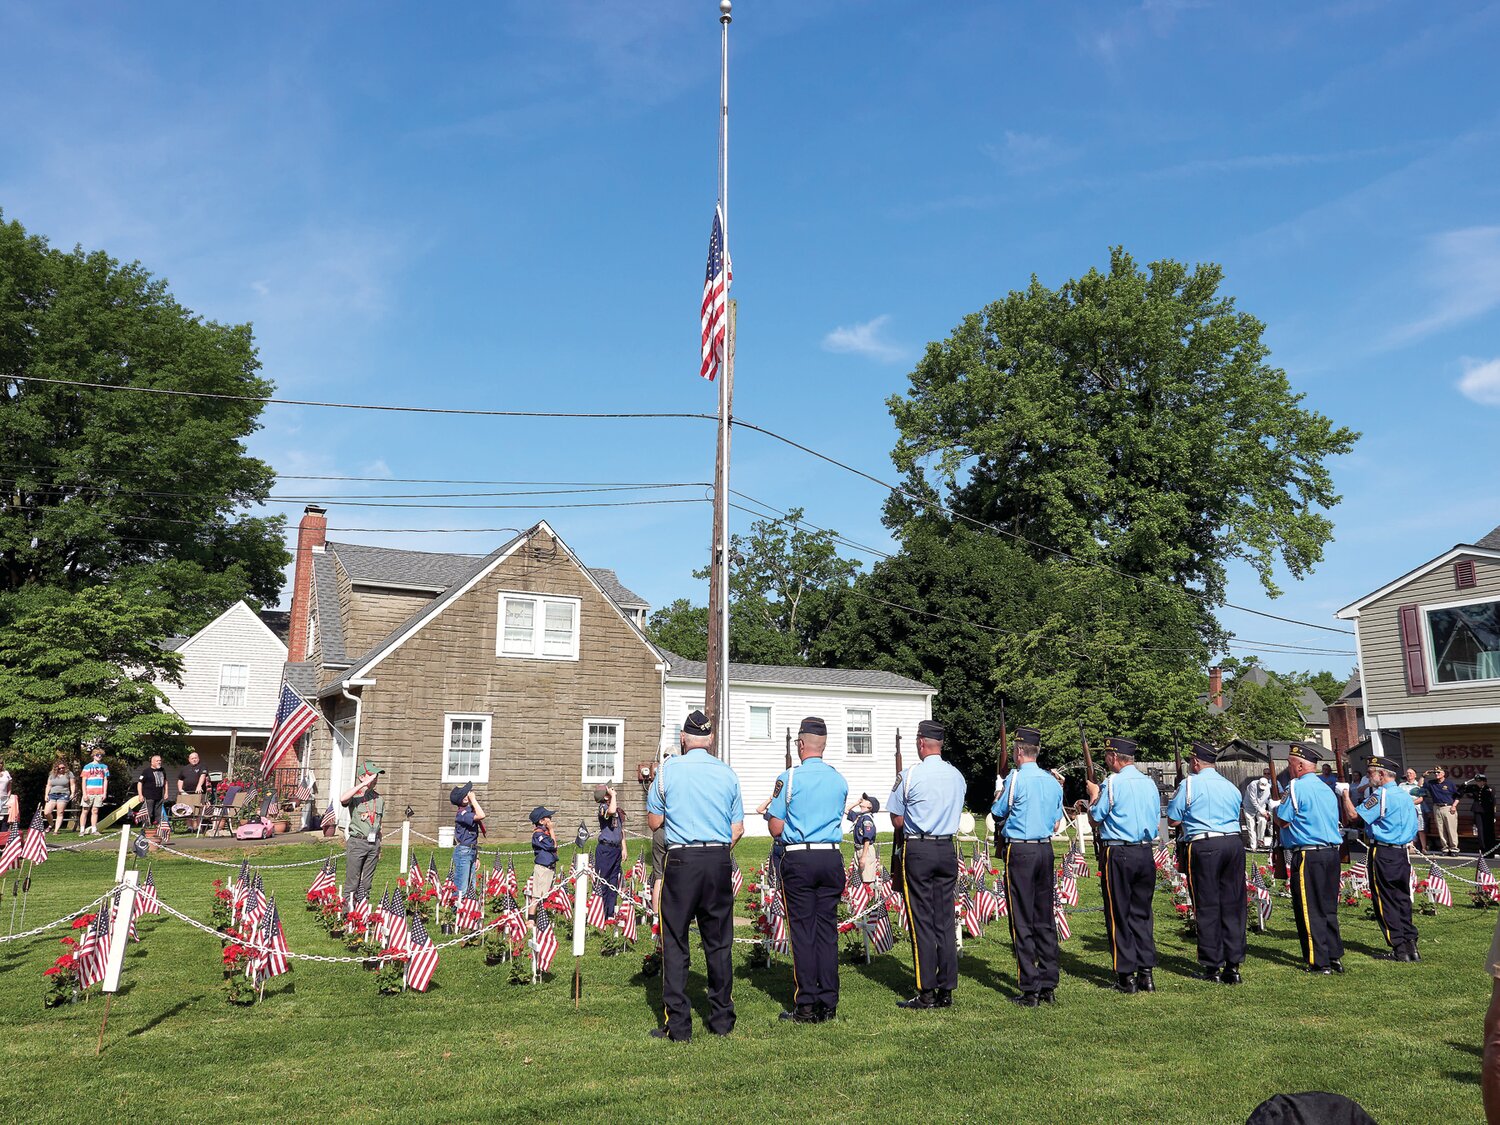 The American flag is raised at Jesse W. Soby Post 148 in Langhorne.